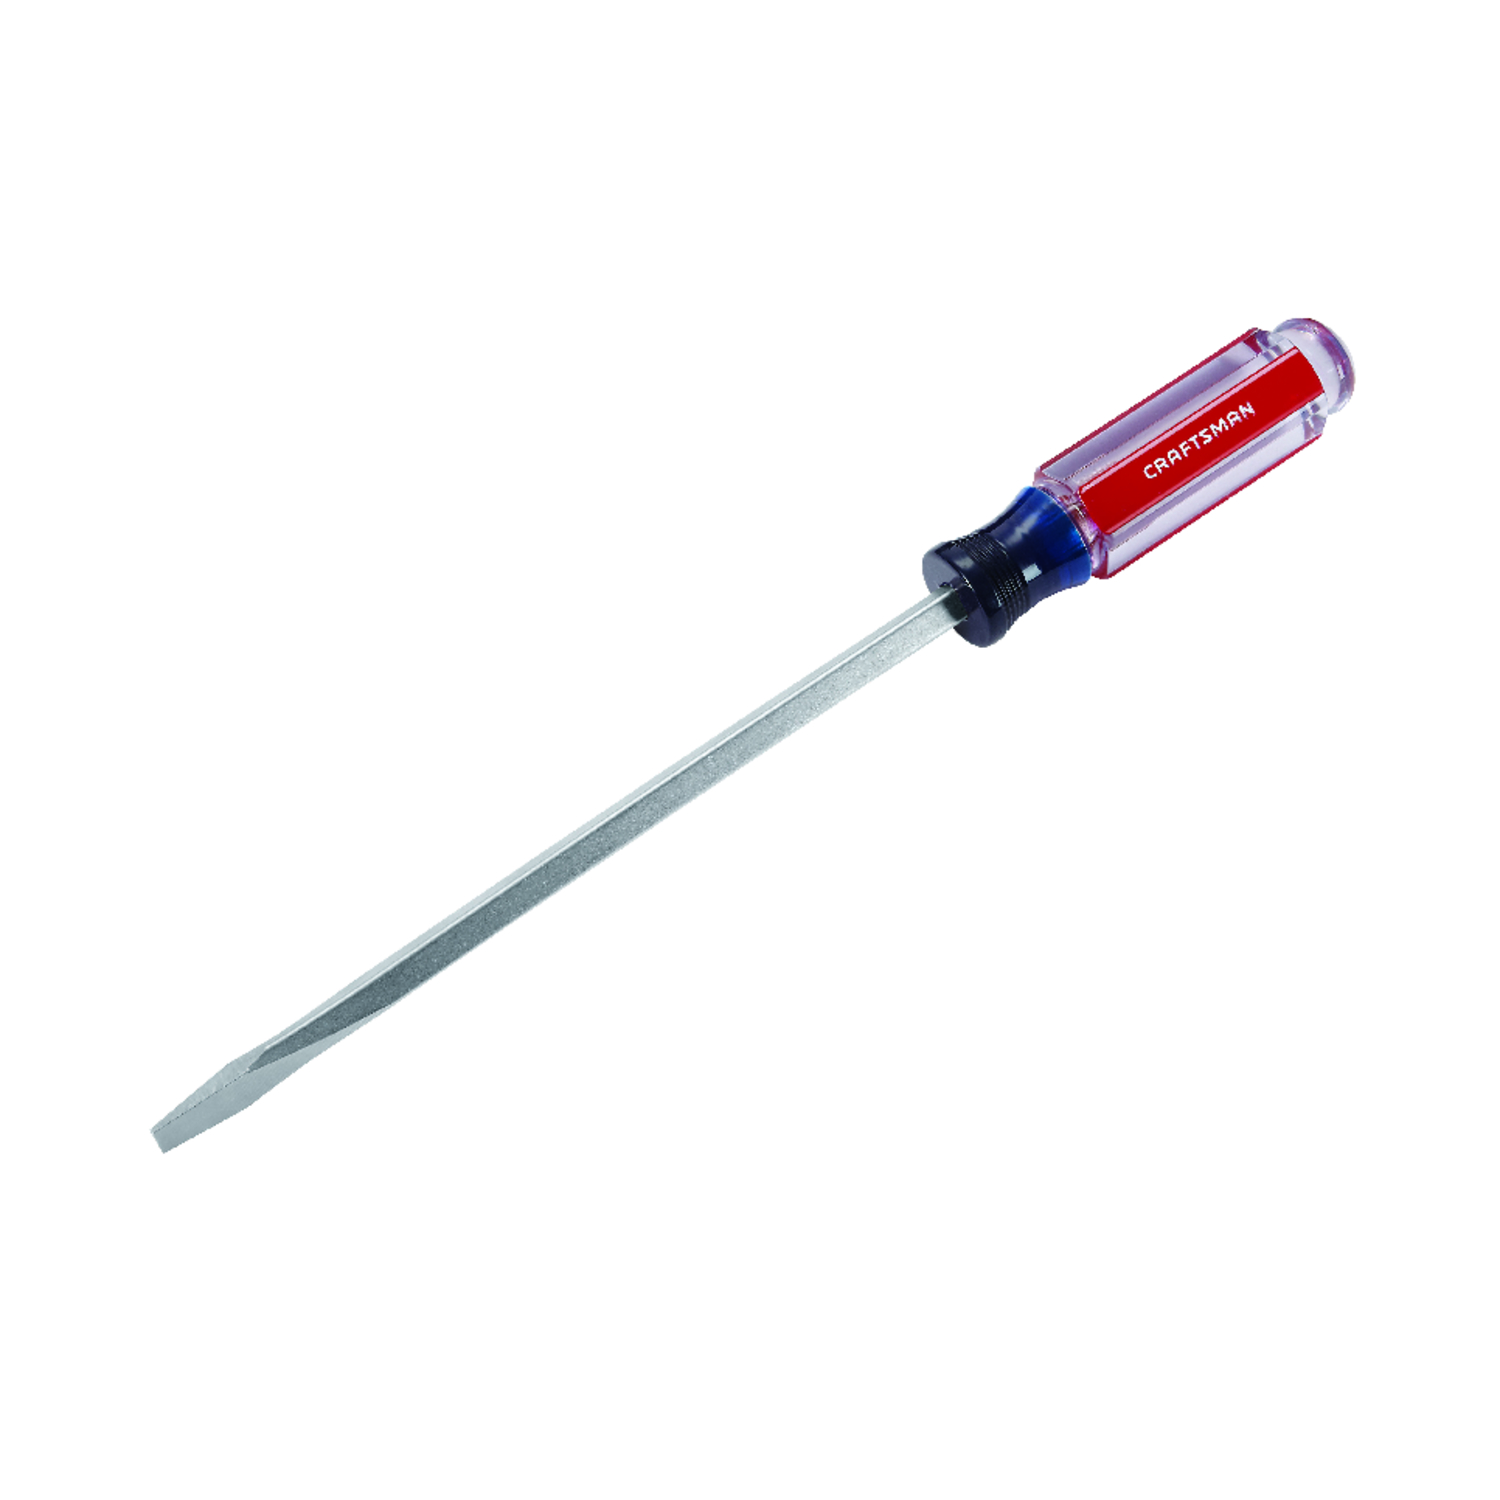 UPC 648738415873 product image for Craftsman 5/16in x 8in Slotted Screwdriver (00941587) | upcitemdb.com